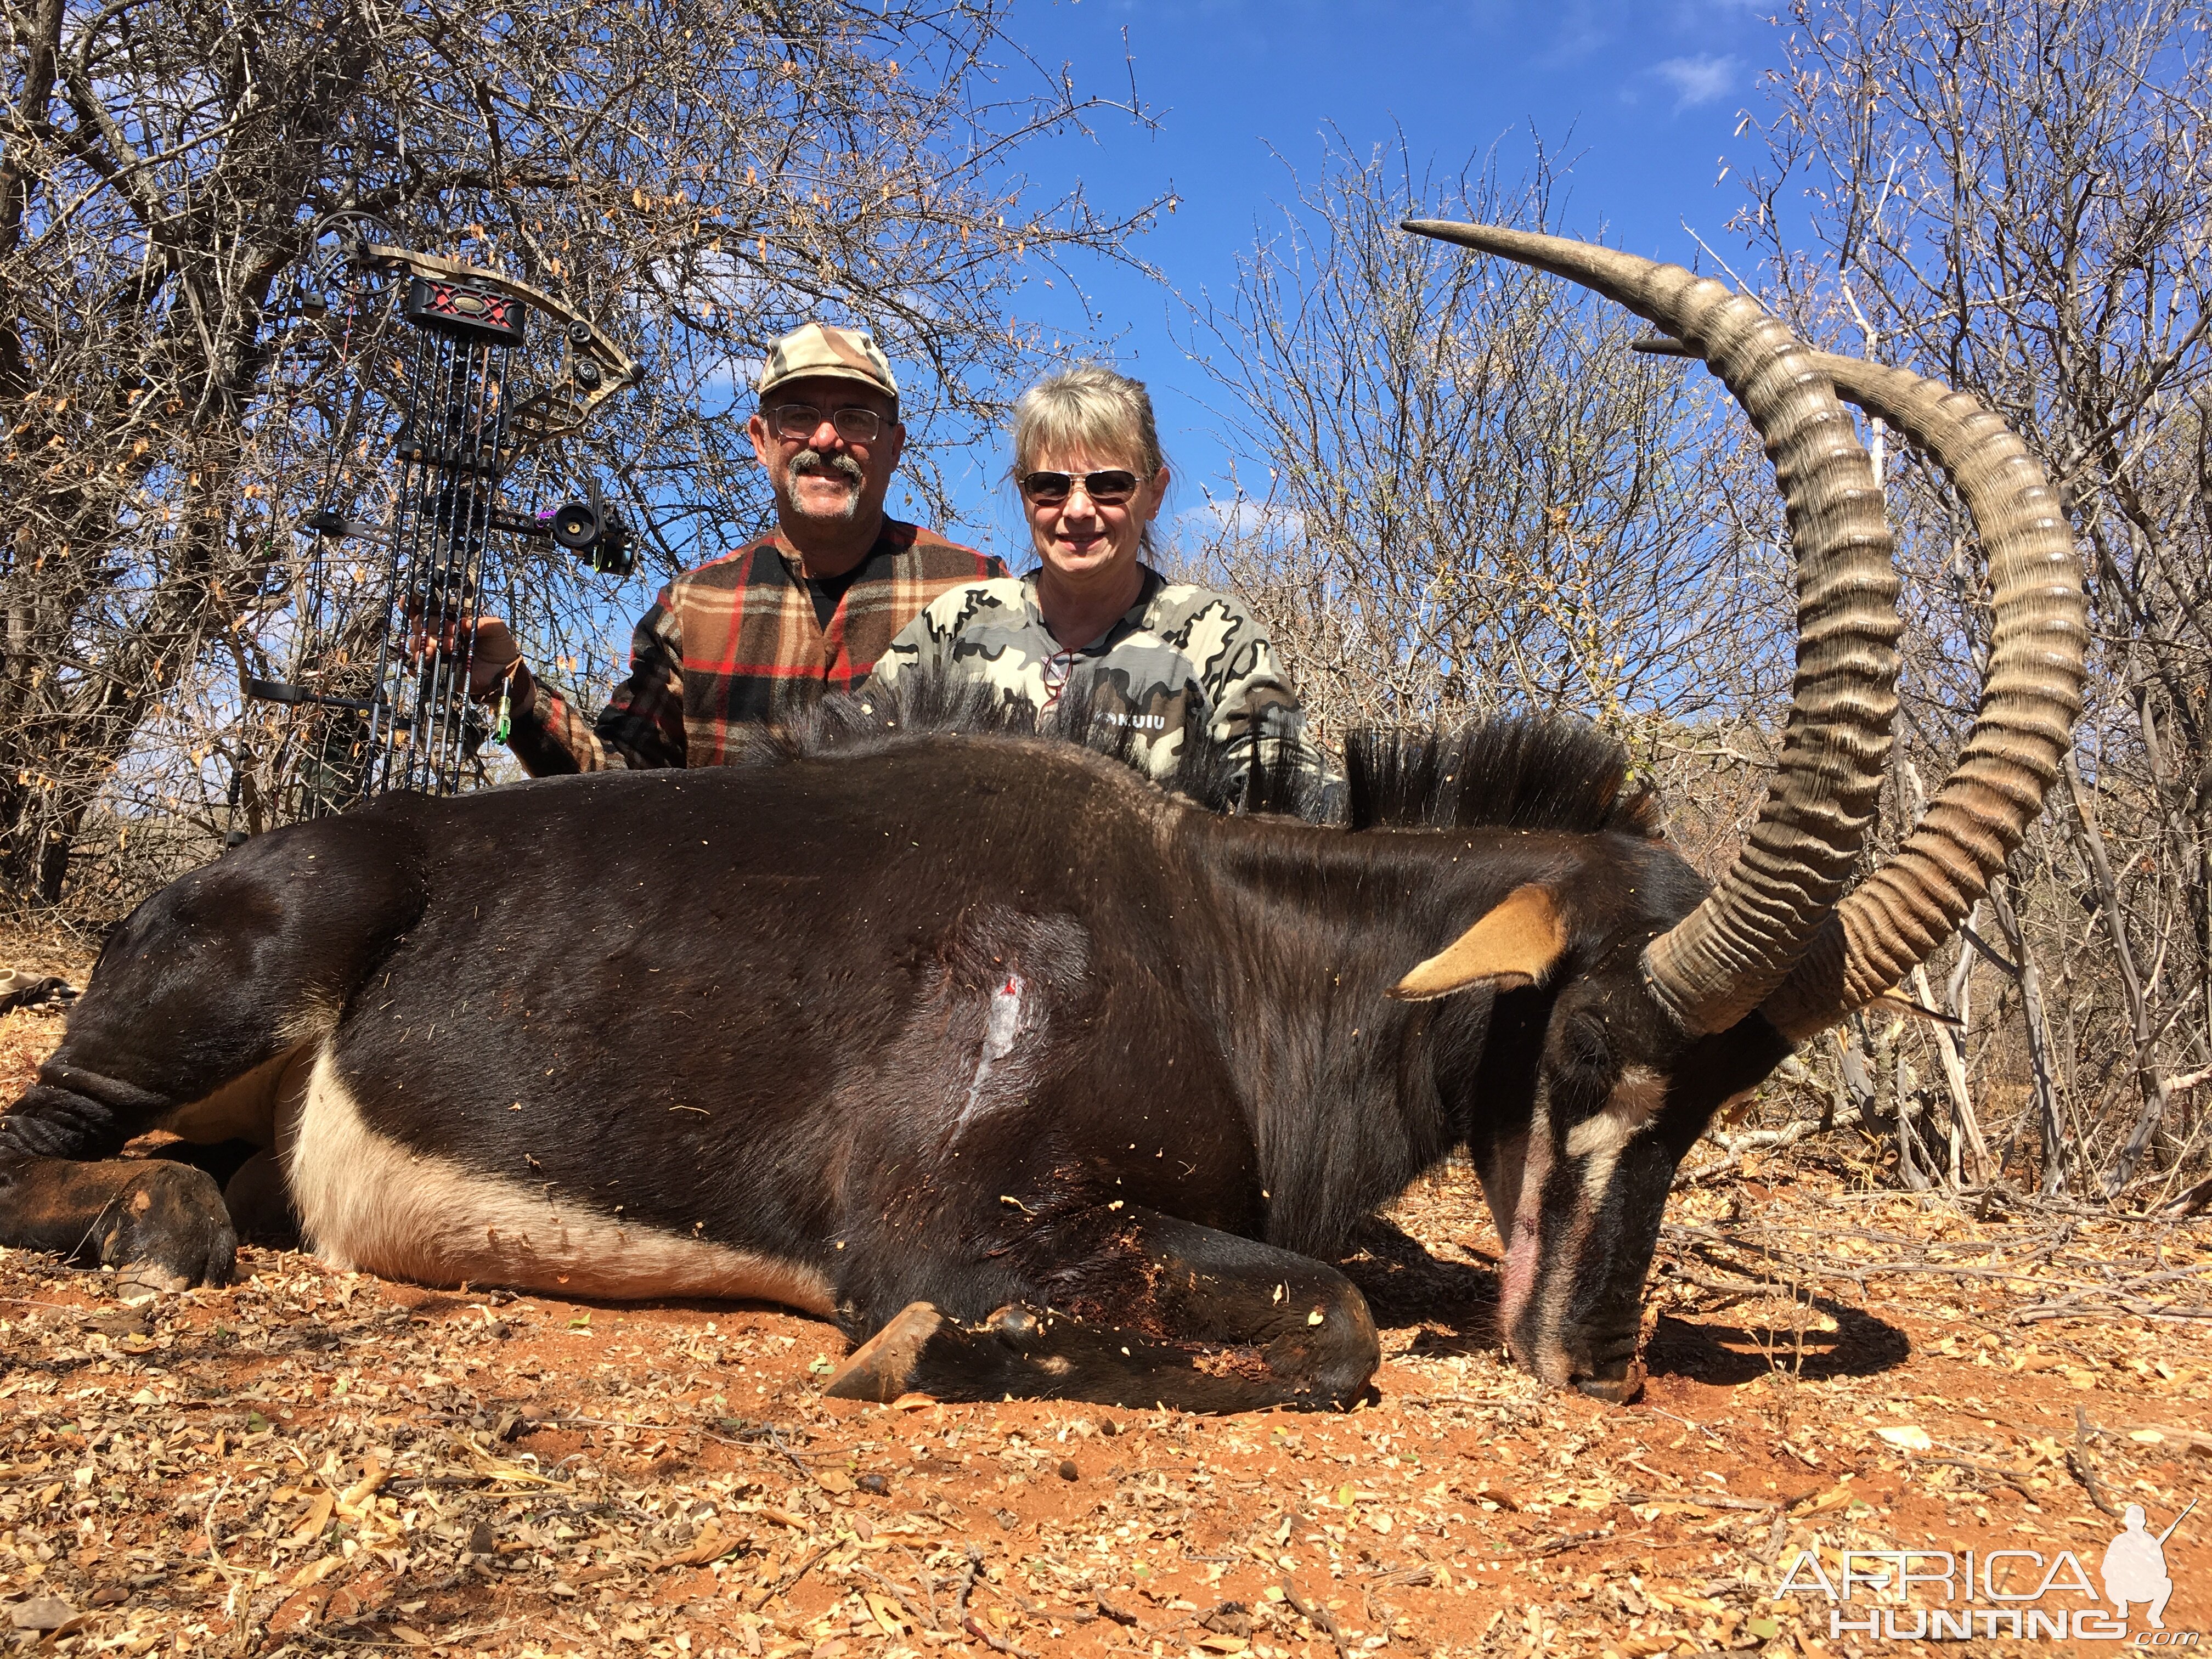 South Africa Bow Hunt Sable Antelope